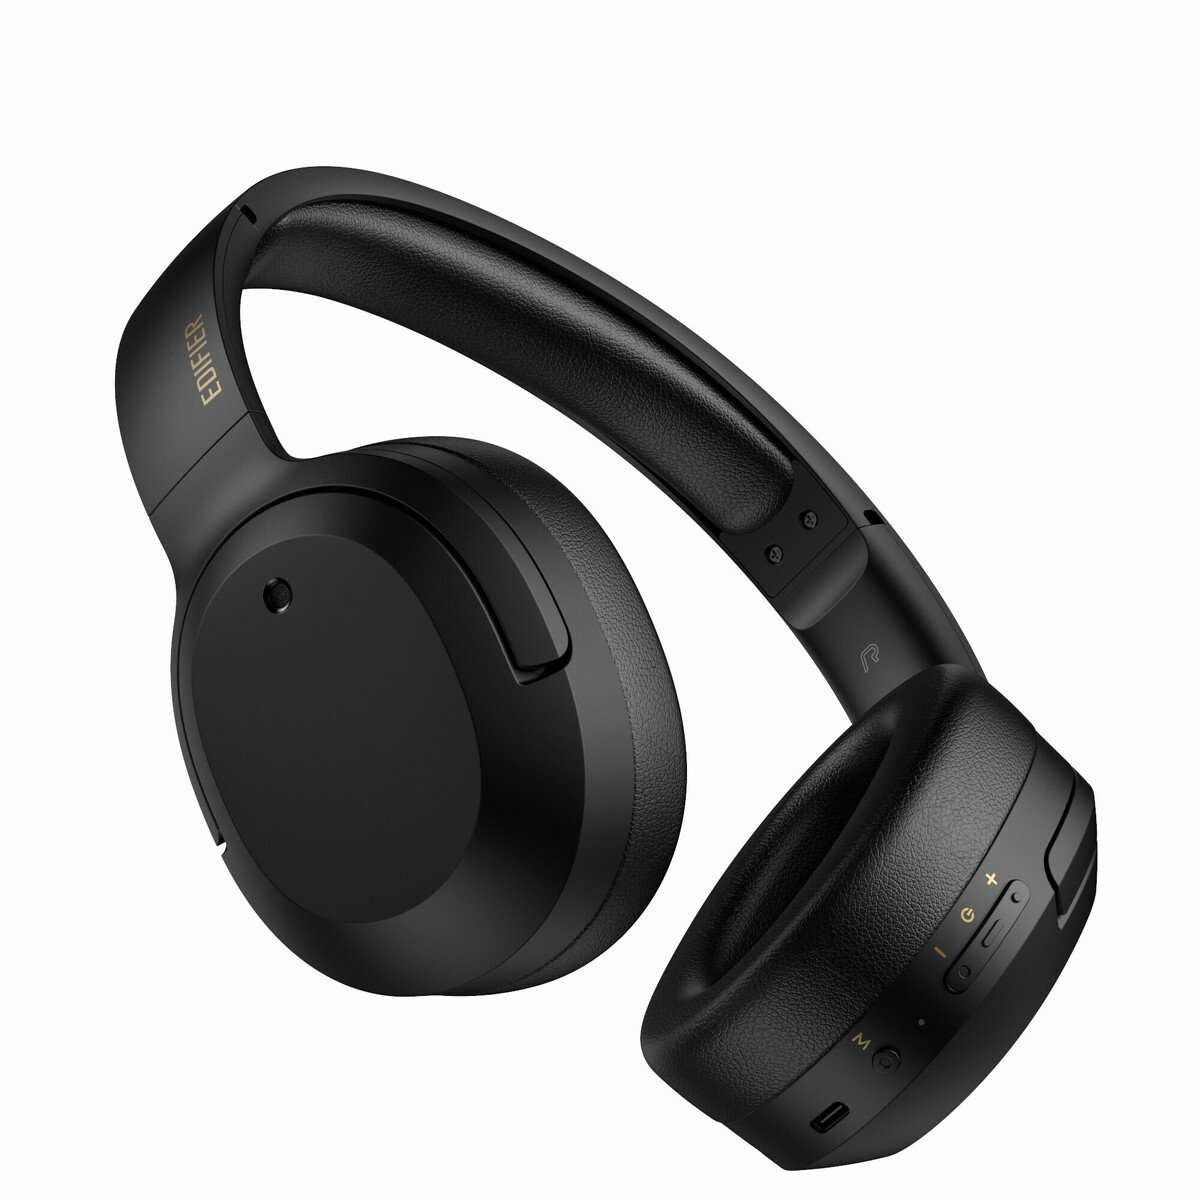 Sony Electronics announces two new headphone models: the WH-CH720N over-ear  and WH-CH520 on-ear wireless headphones featuring Sony's Digital Sound  Equipment Engine